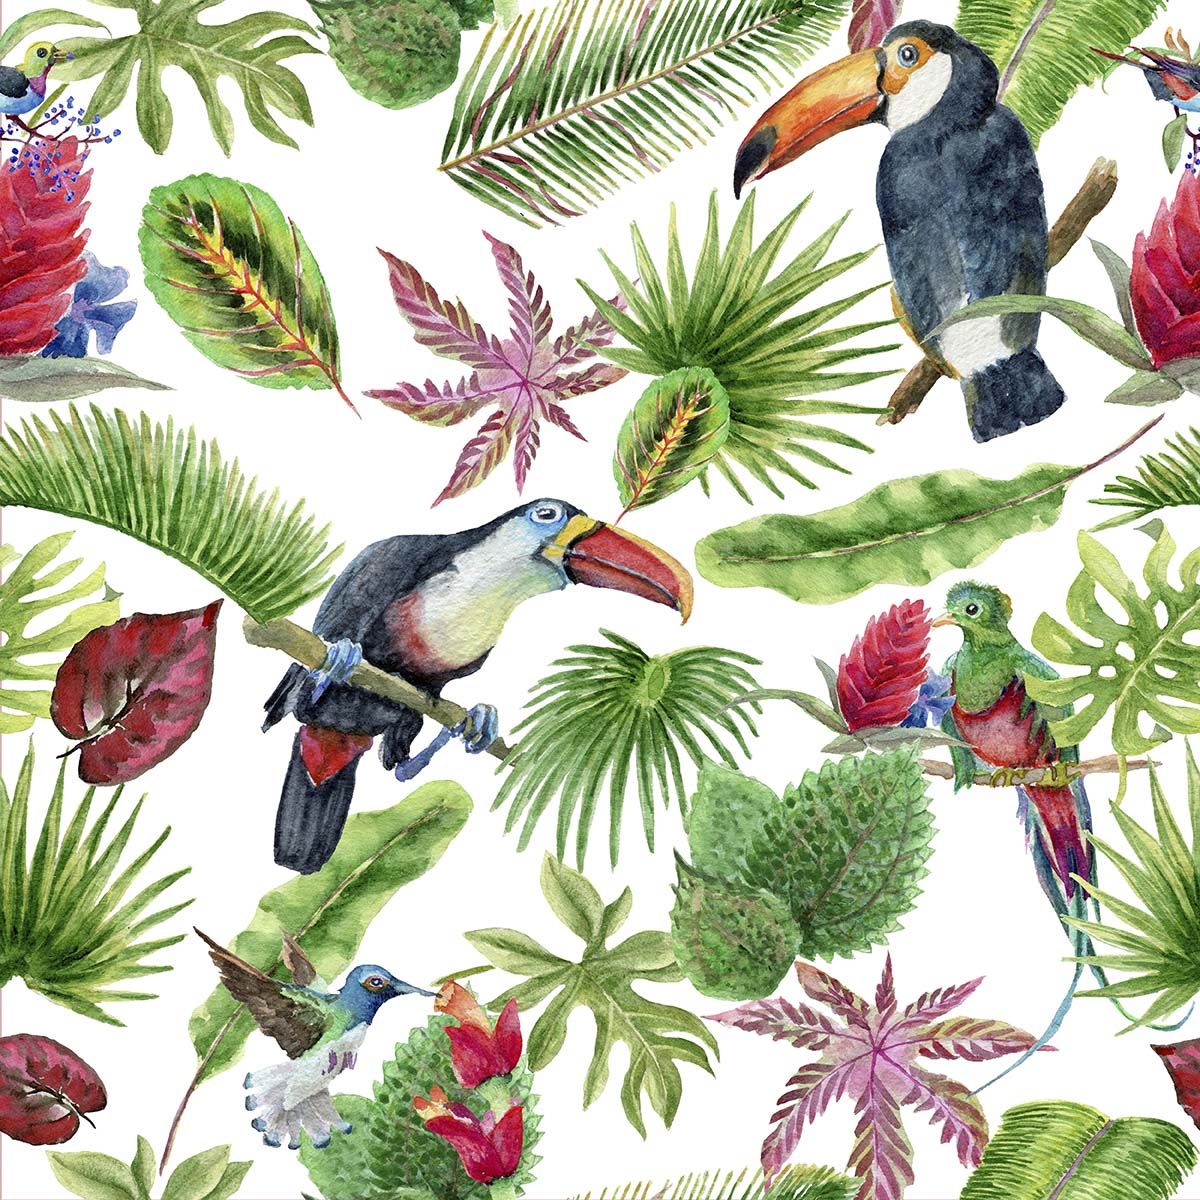 A pattern of birds and leaves